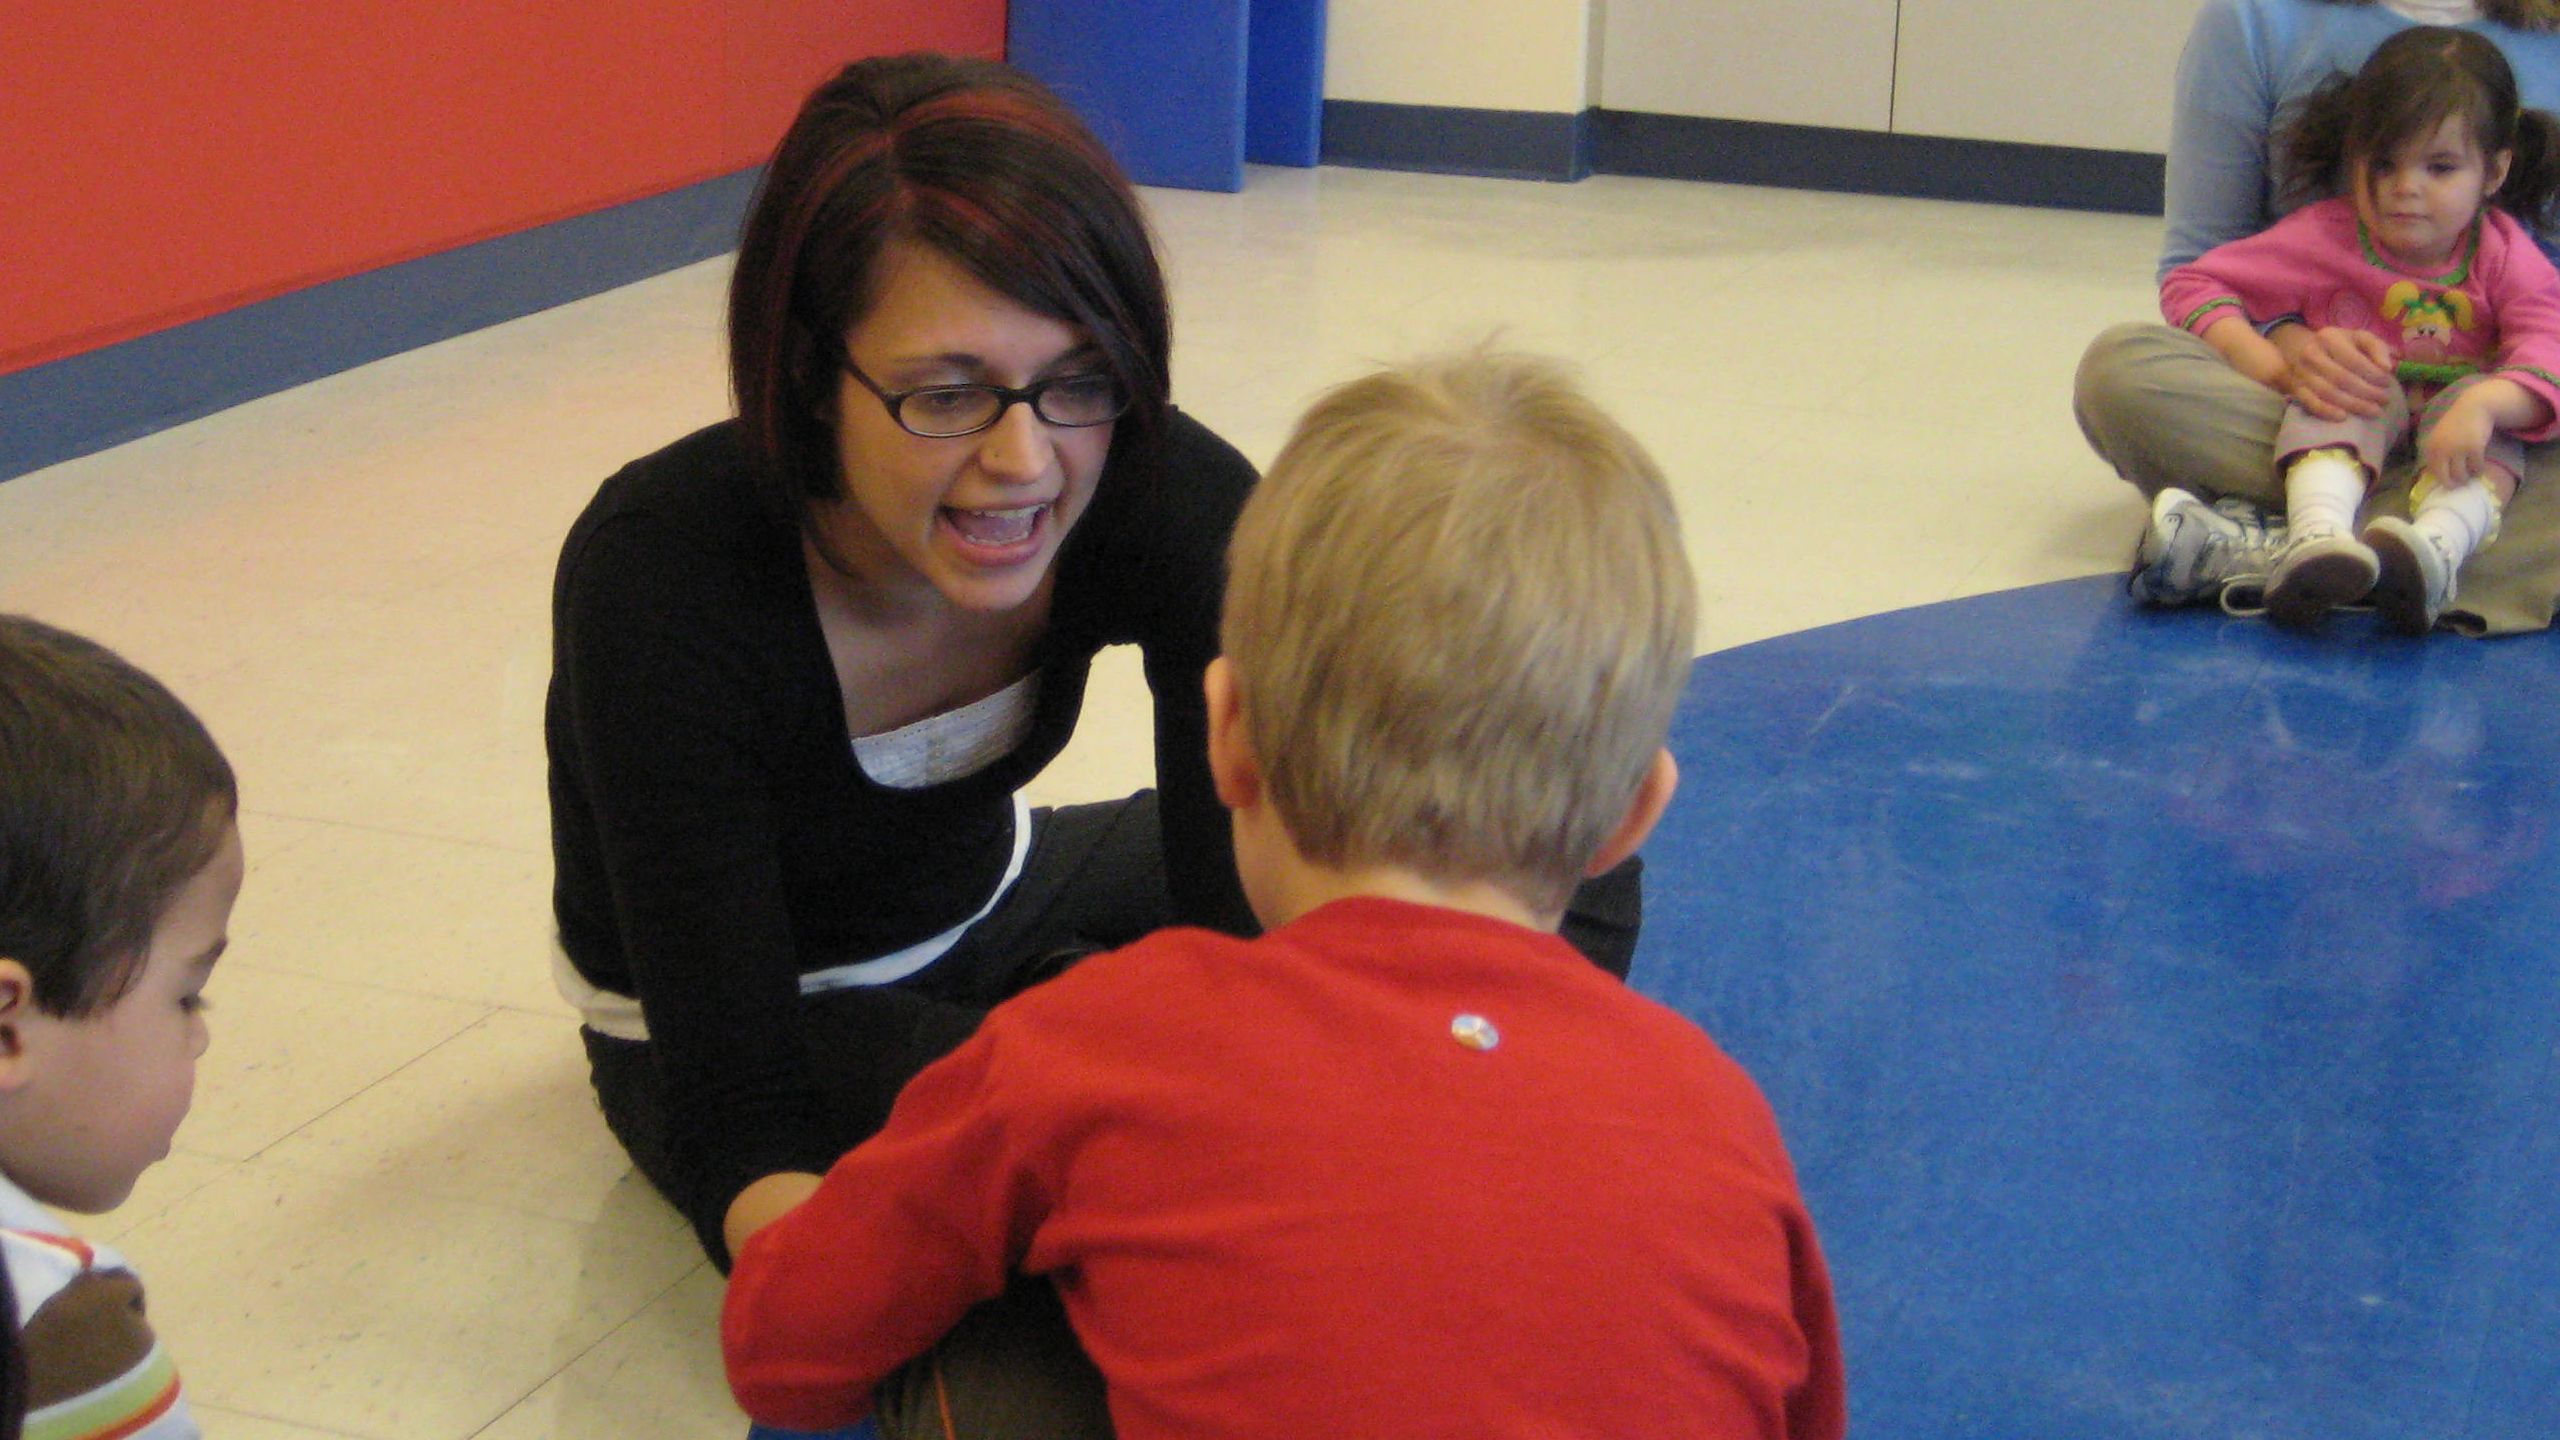 Stefanie Waldrop teaches children at the Marcus Autism Center in Atlanta, Georgia, on March 5, 2009. The center works with children who have developmental disabilities.